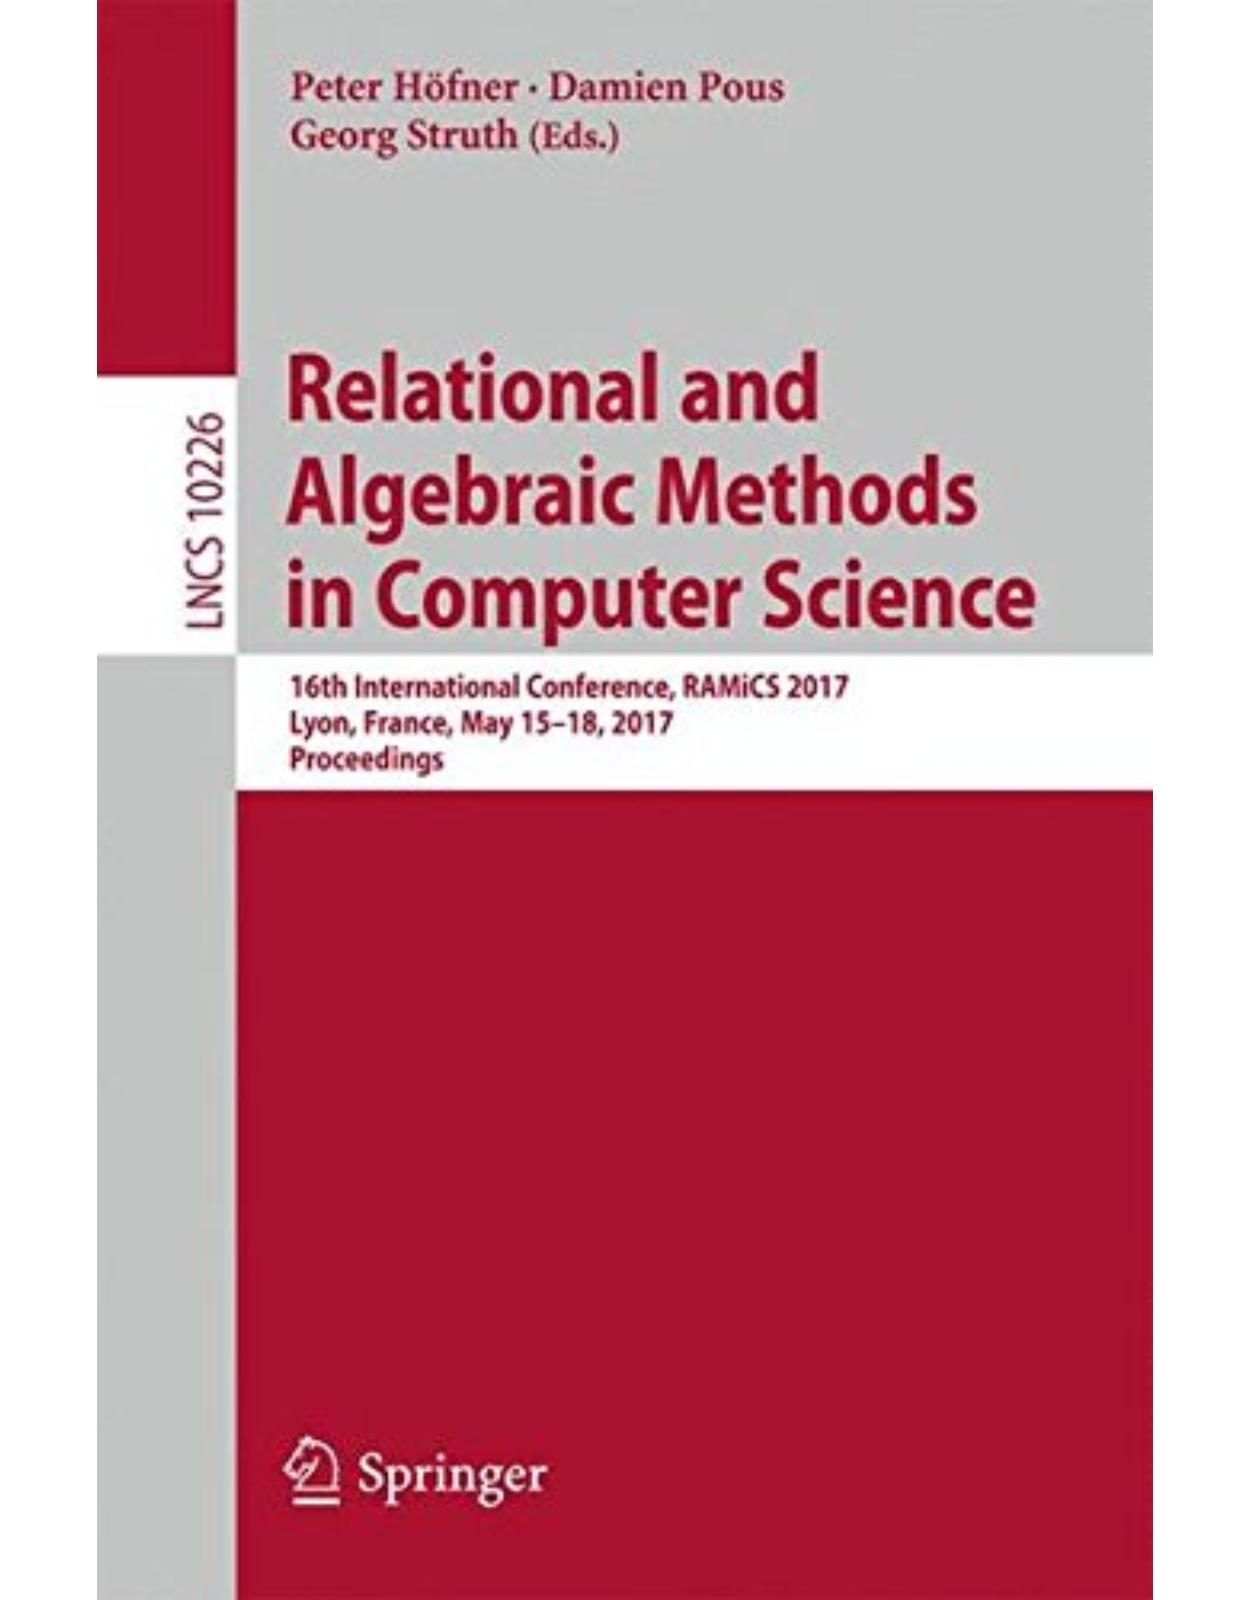 Relational and Algebraic Methods in Computer Science: 16th International Conference, RAMiCS 2017, Lyon, France, May 15-18, 2017, Proceedings